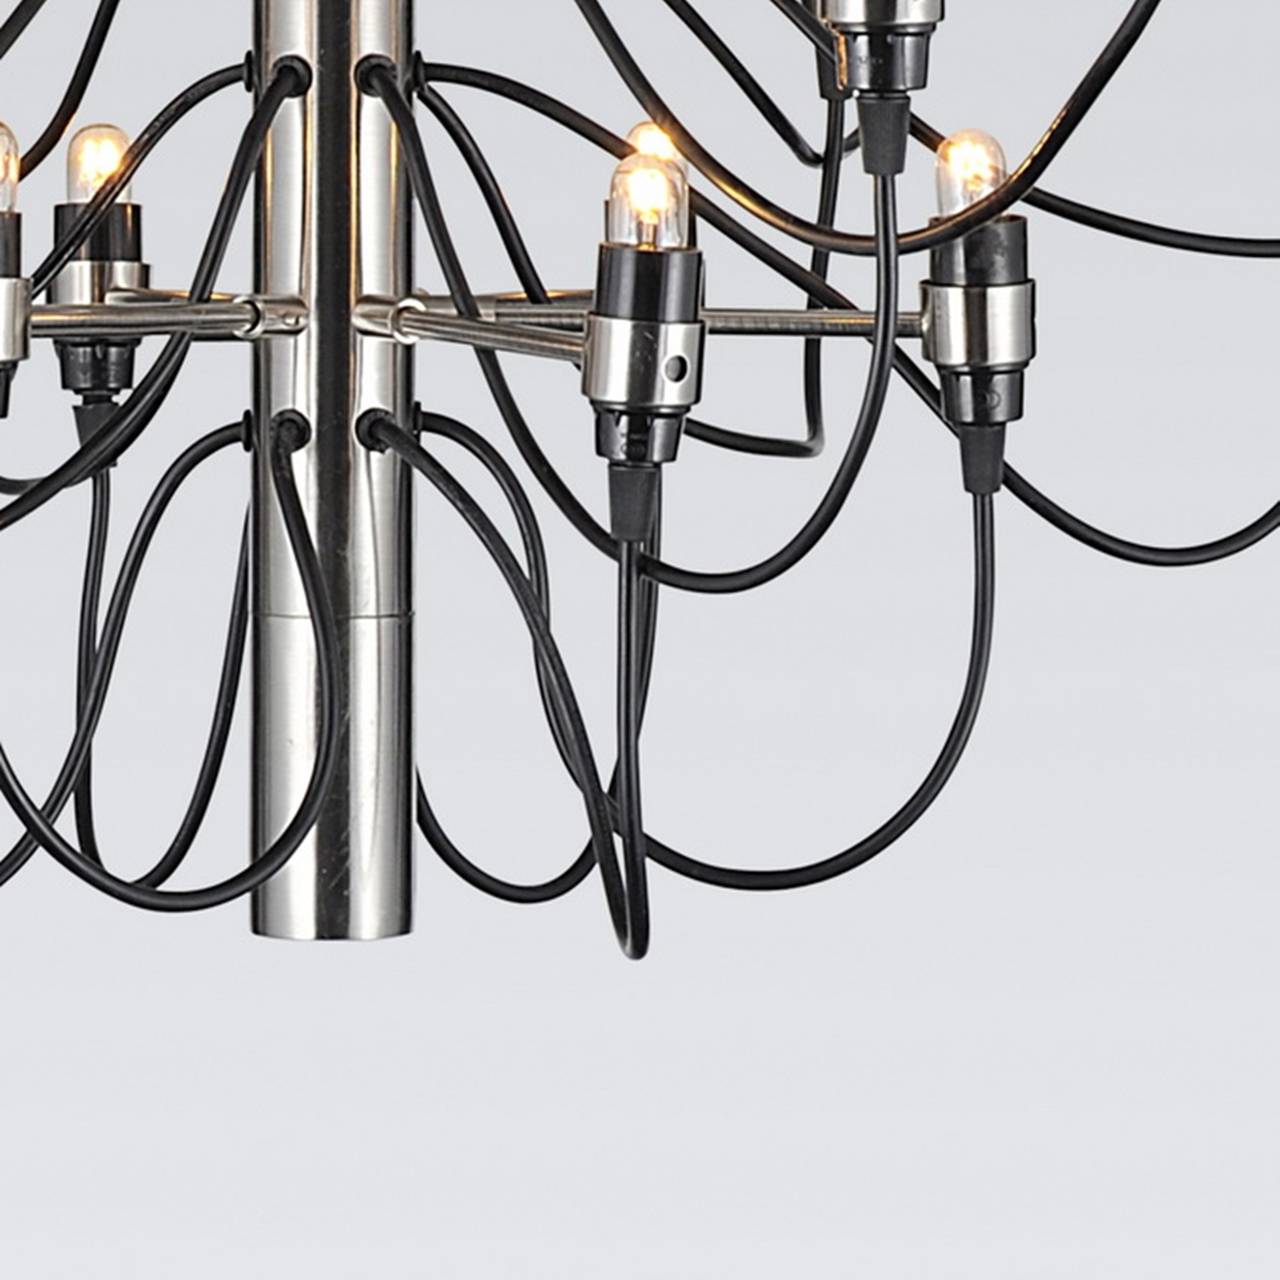 Beautiful light fixture designed by Gino Sarfatti and manufactured by Flos.
The piece is in very good original condition and fully functional.

Measurements:
Chandelier only: 29